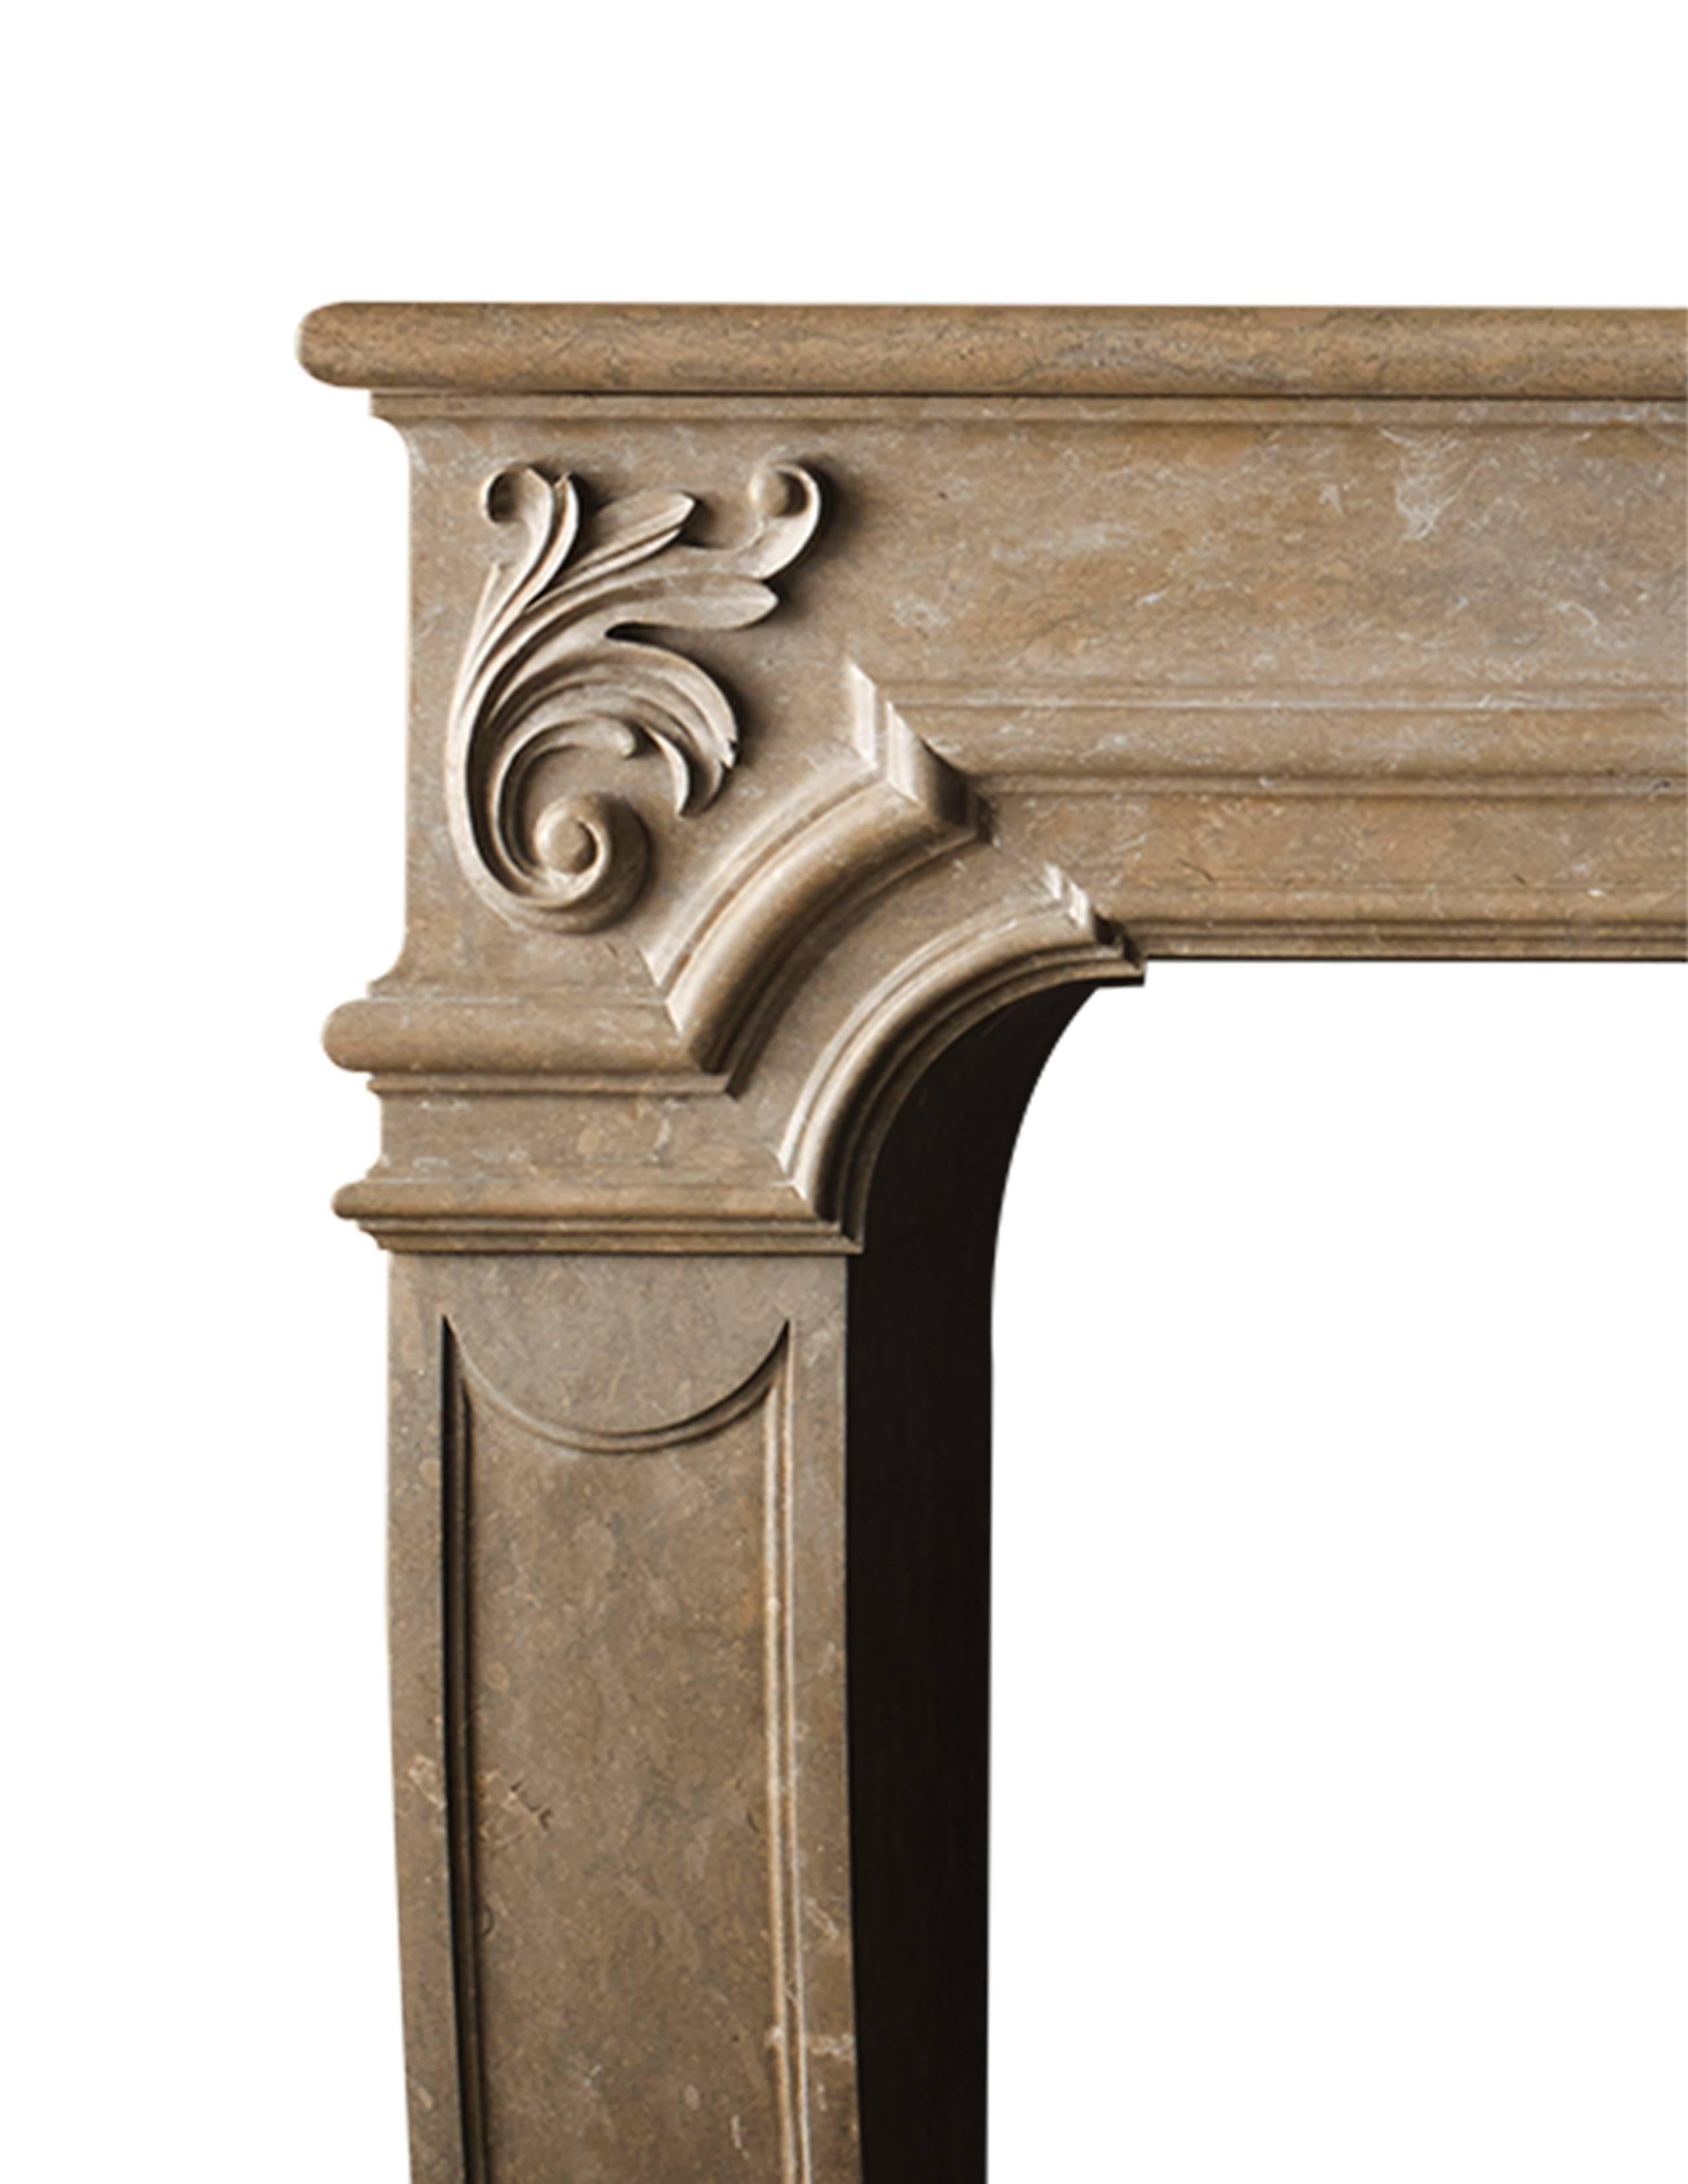 From Chesney's collaboration with Suzanne Tucker. The Antibes is inspired by the joie de vivre of the French Regency style, at once romantic and restrained. This classically proportioned and elegantly detailed mantel is available with and without